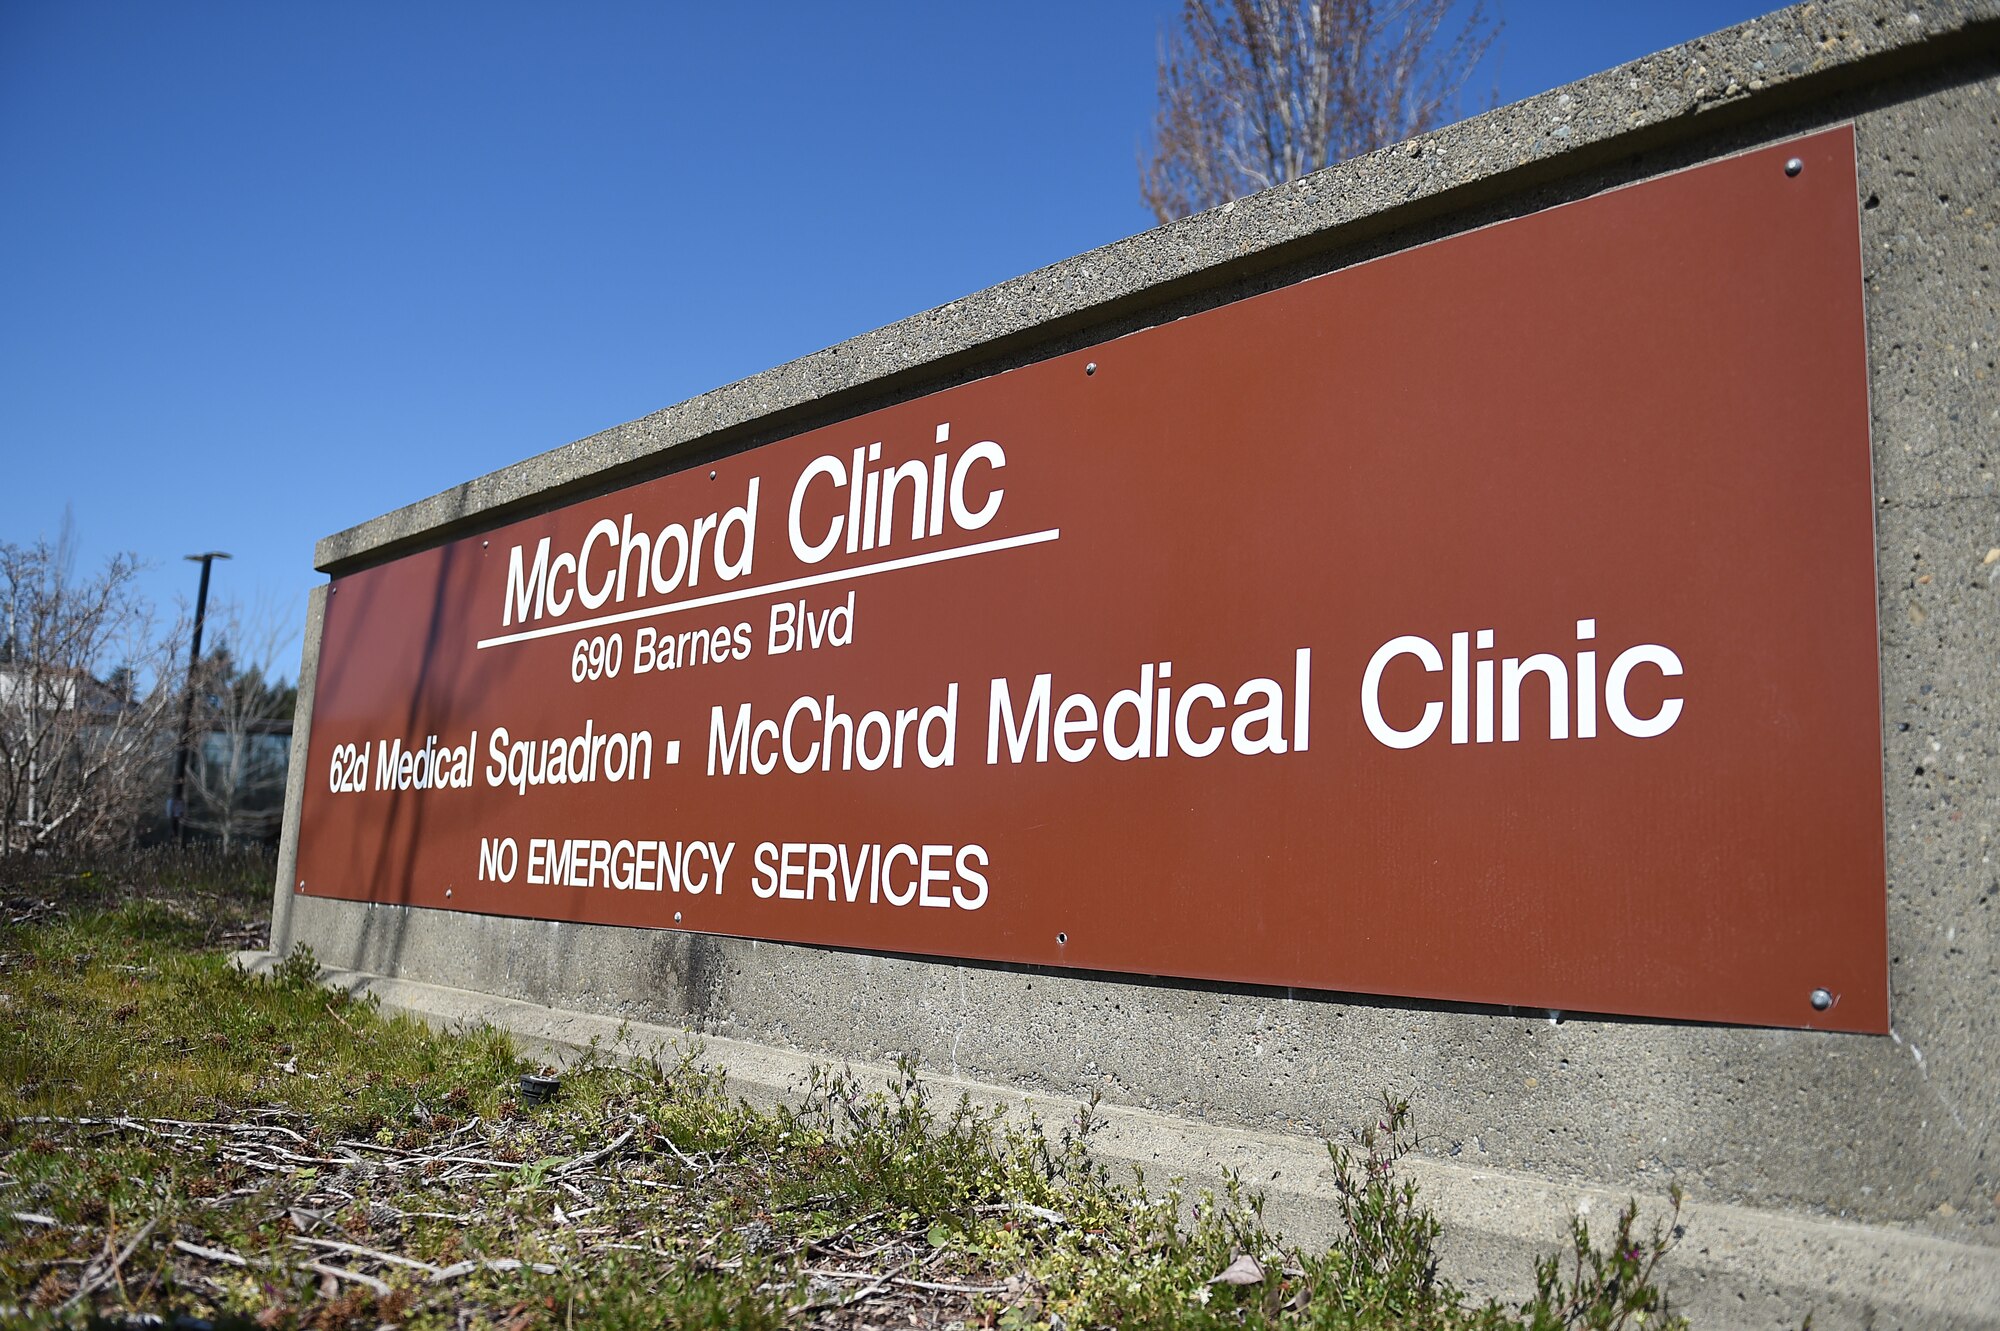 The 62nd Medical Squadron, or McChord Clinic, has changed the way it does several of its daily operations considering the COVID-19 pandemic. Many medical appointments are now provided over the phone and all individuals are medically screened prior to entering the clinic. (U.S. Air Force photo by Airman 1st Class Mikayla Heineck)